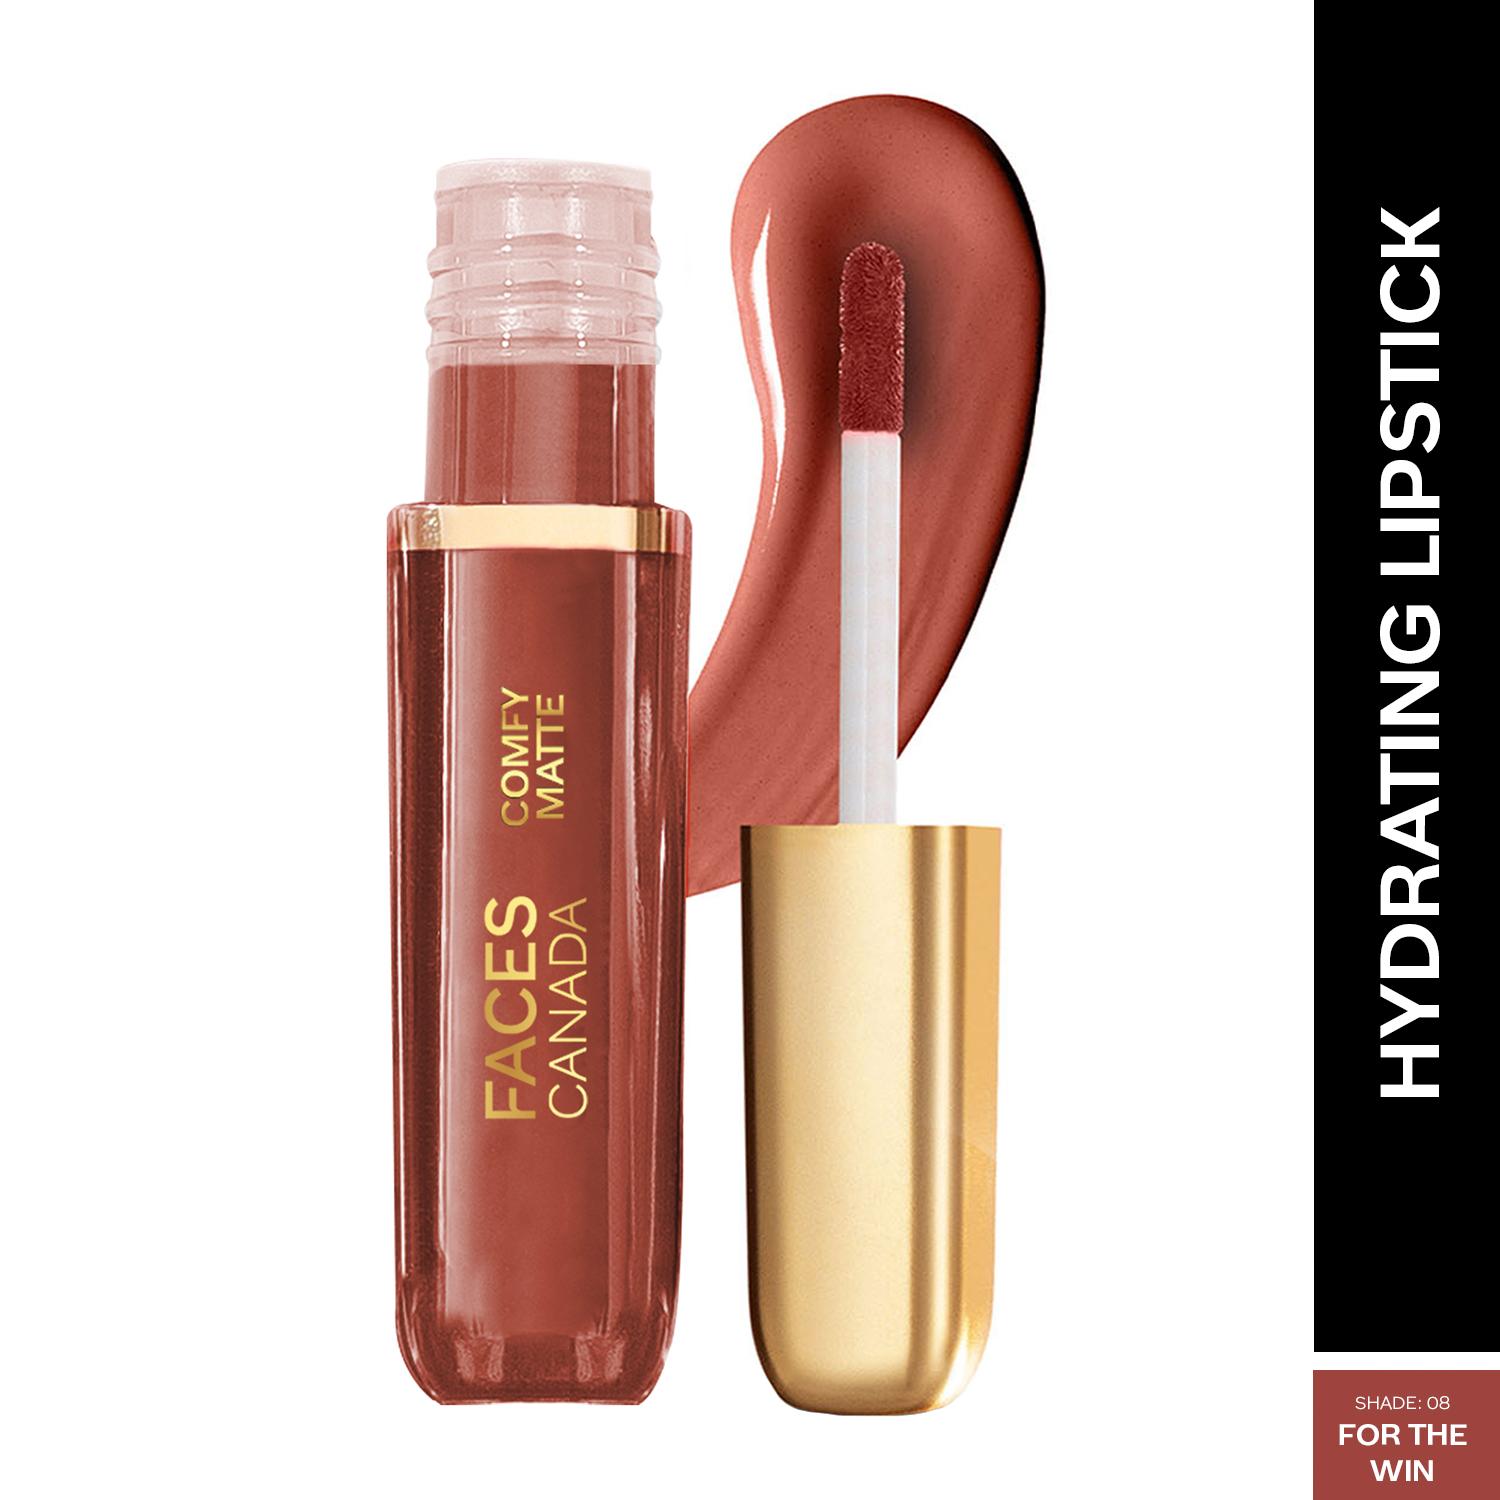 Faces Canada | Faces Canada Comfy Matte Liquid Lipstick, 10HR Stay, No Dryness - For The Win 08 (3 ml)